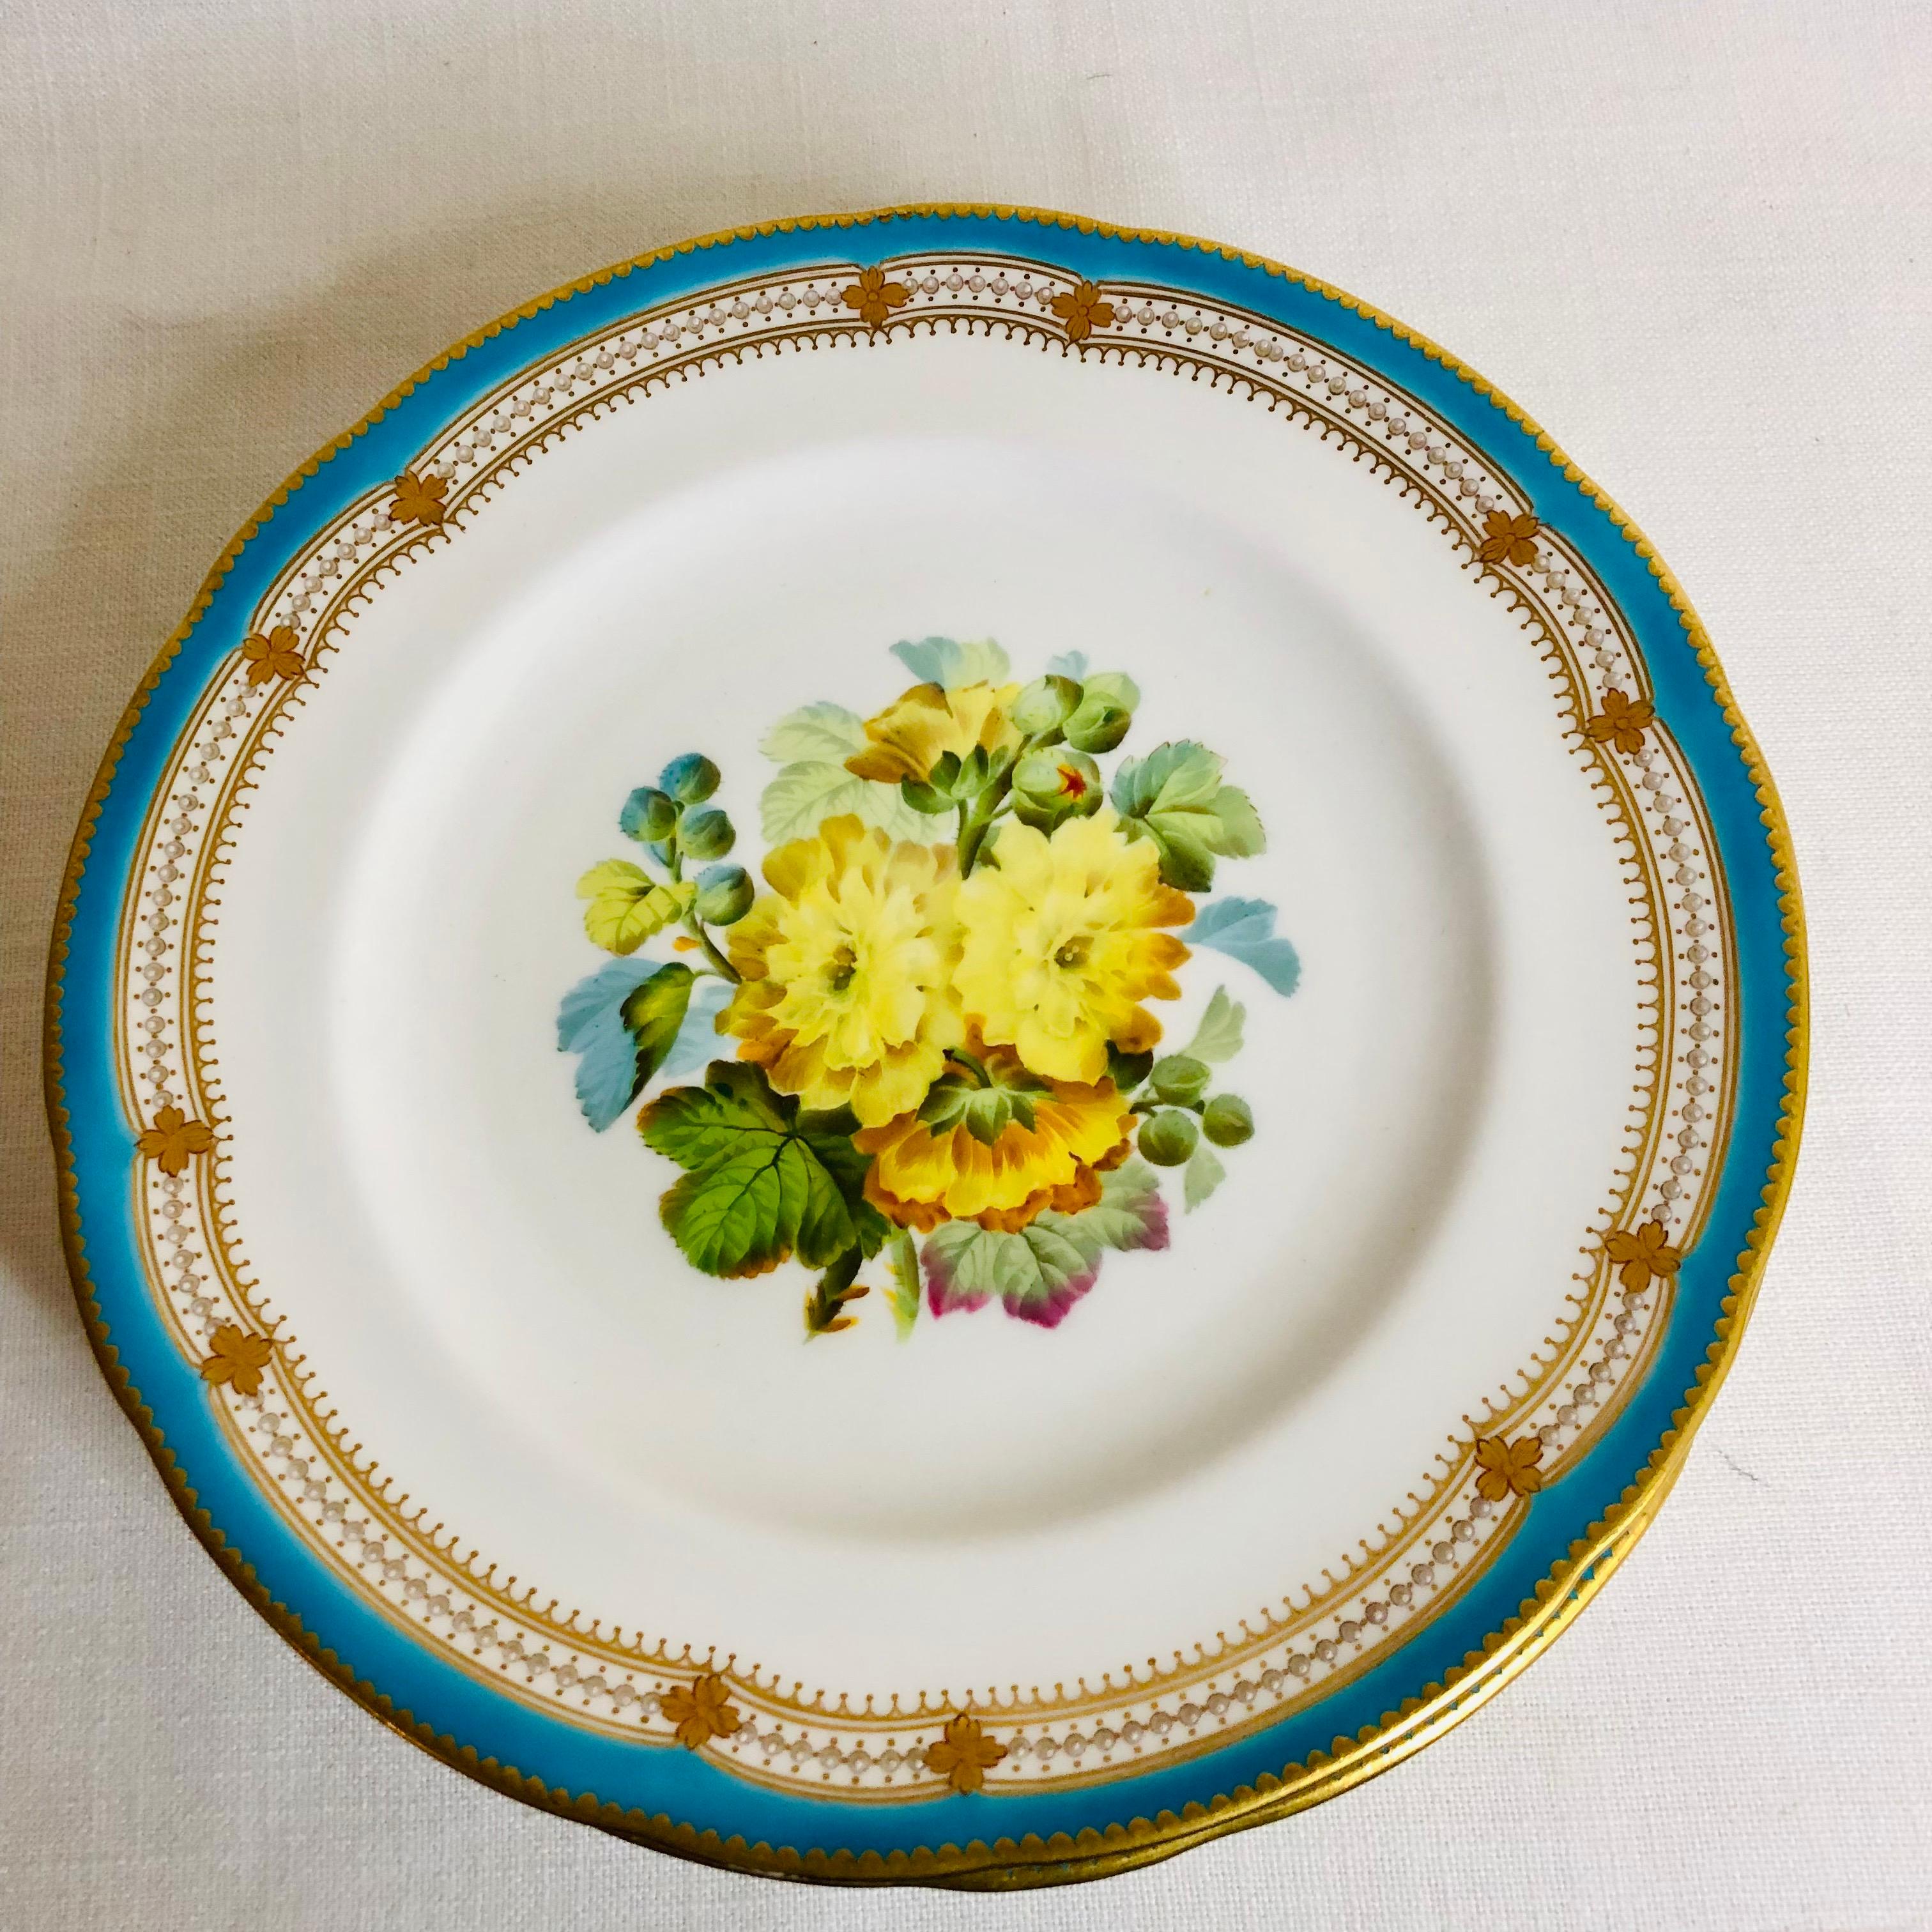 Set of 16 Rare Minton Plates Each Hand-Painted with a Different Flower Bouquet 8